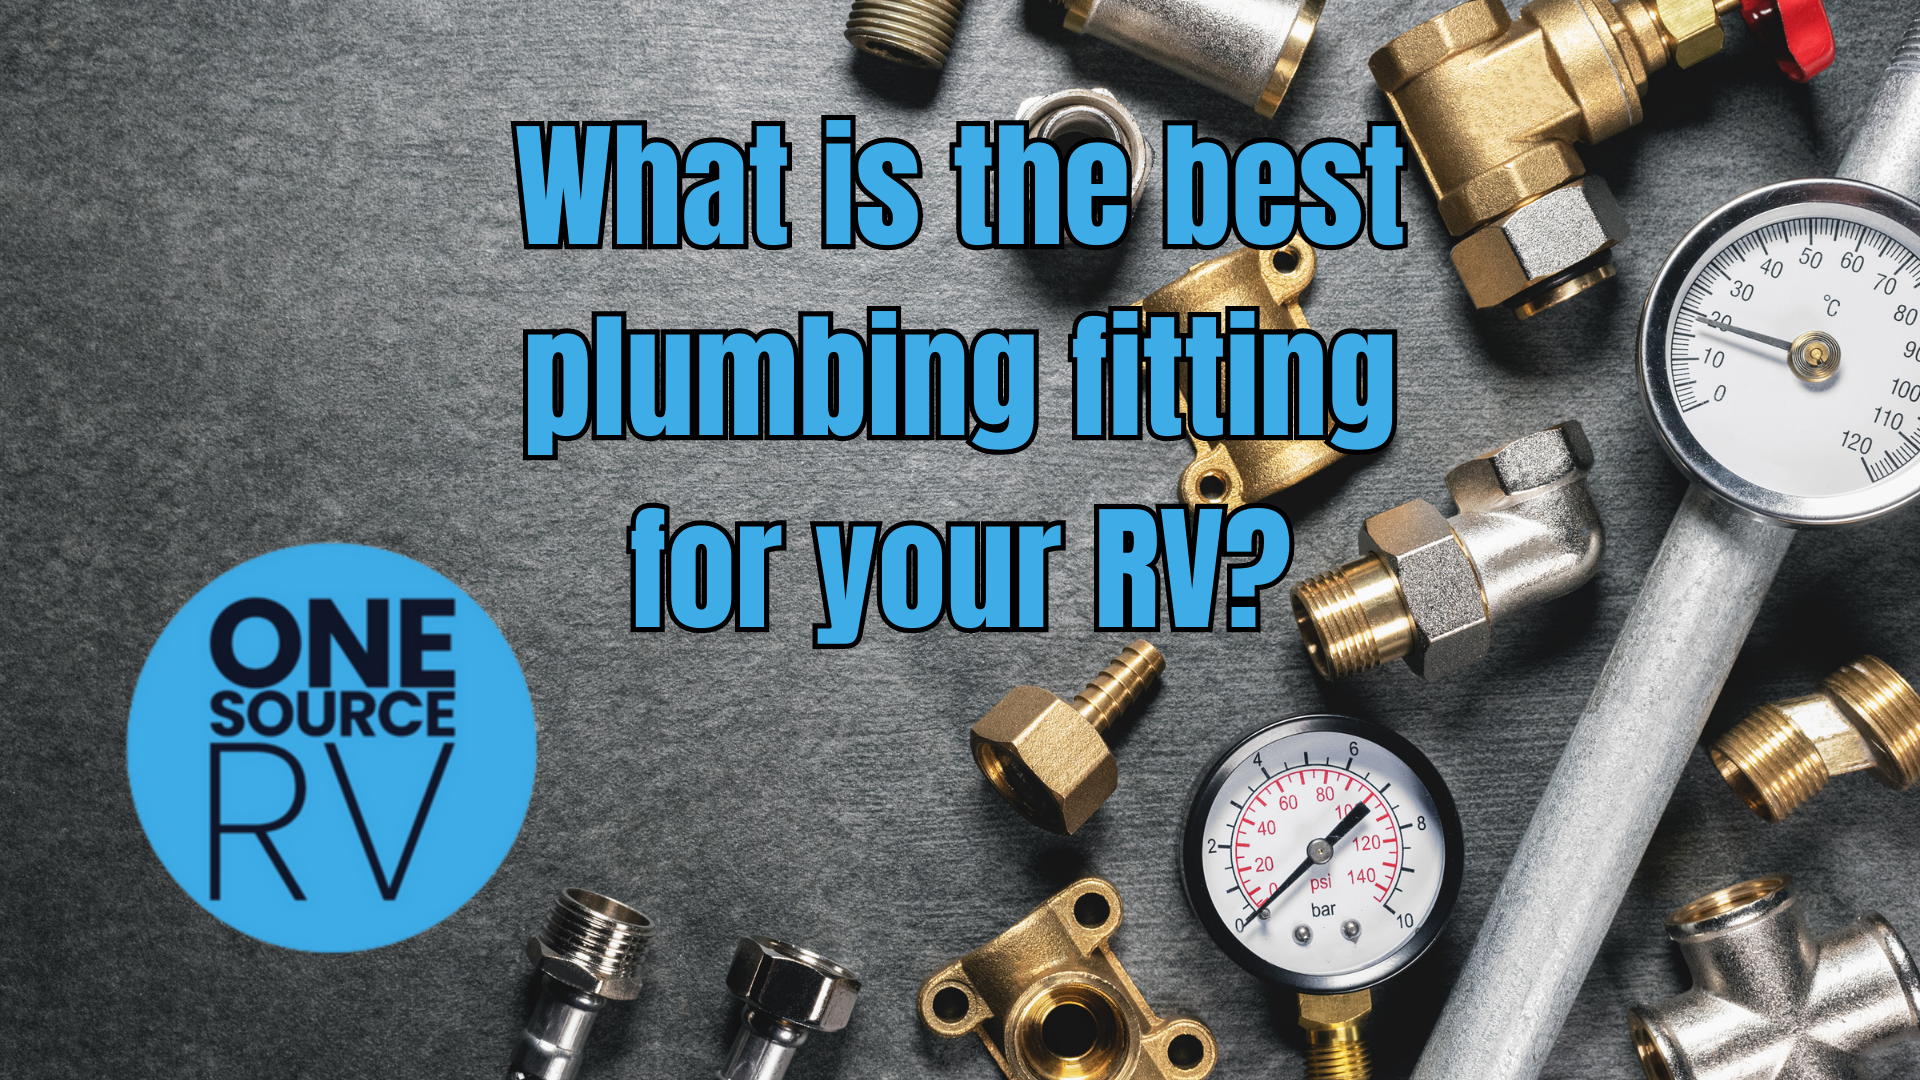 What is the best plumbing fitting for your RV?